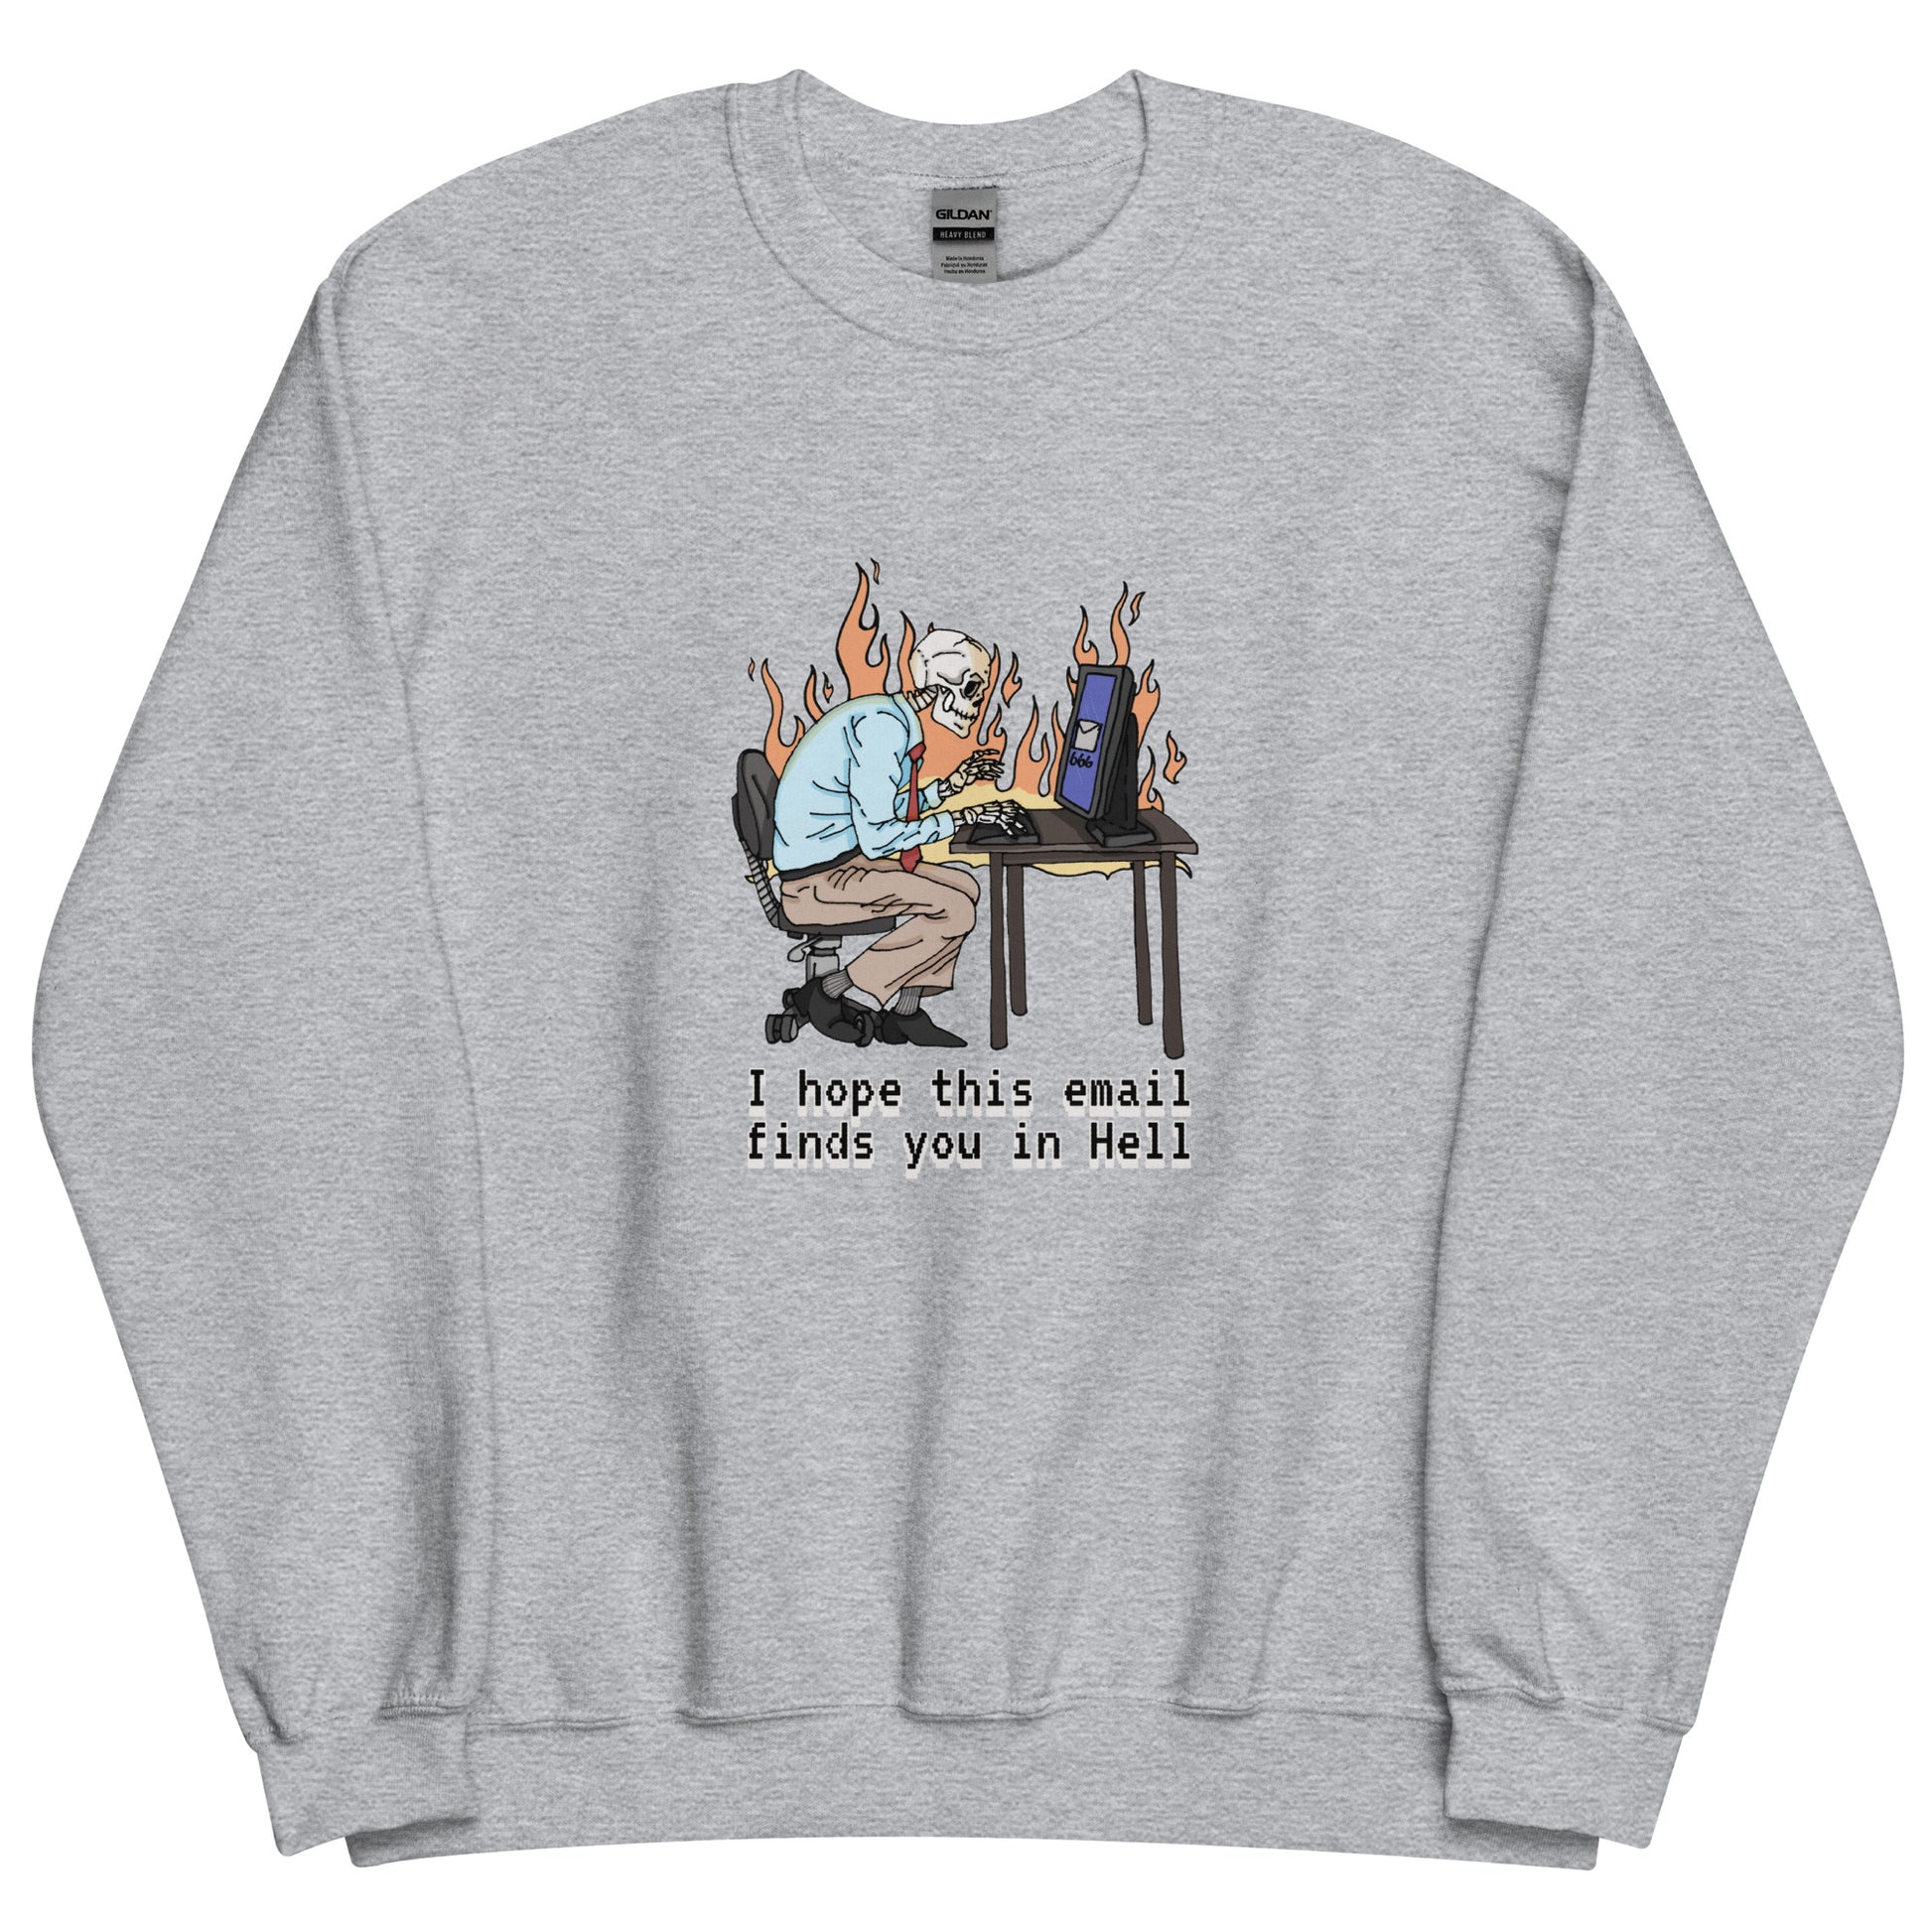 i hope this emails finds you in hell sweatshirt in light grey - gaslit apparel